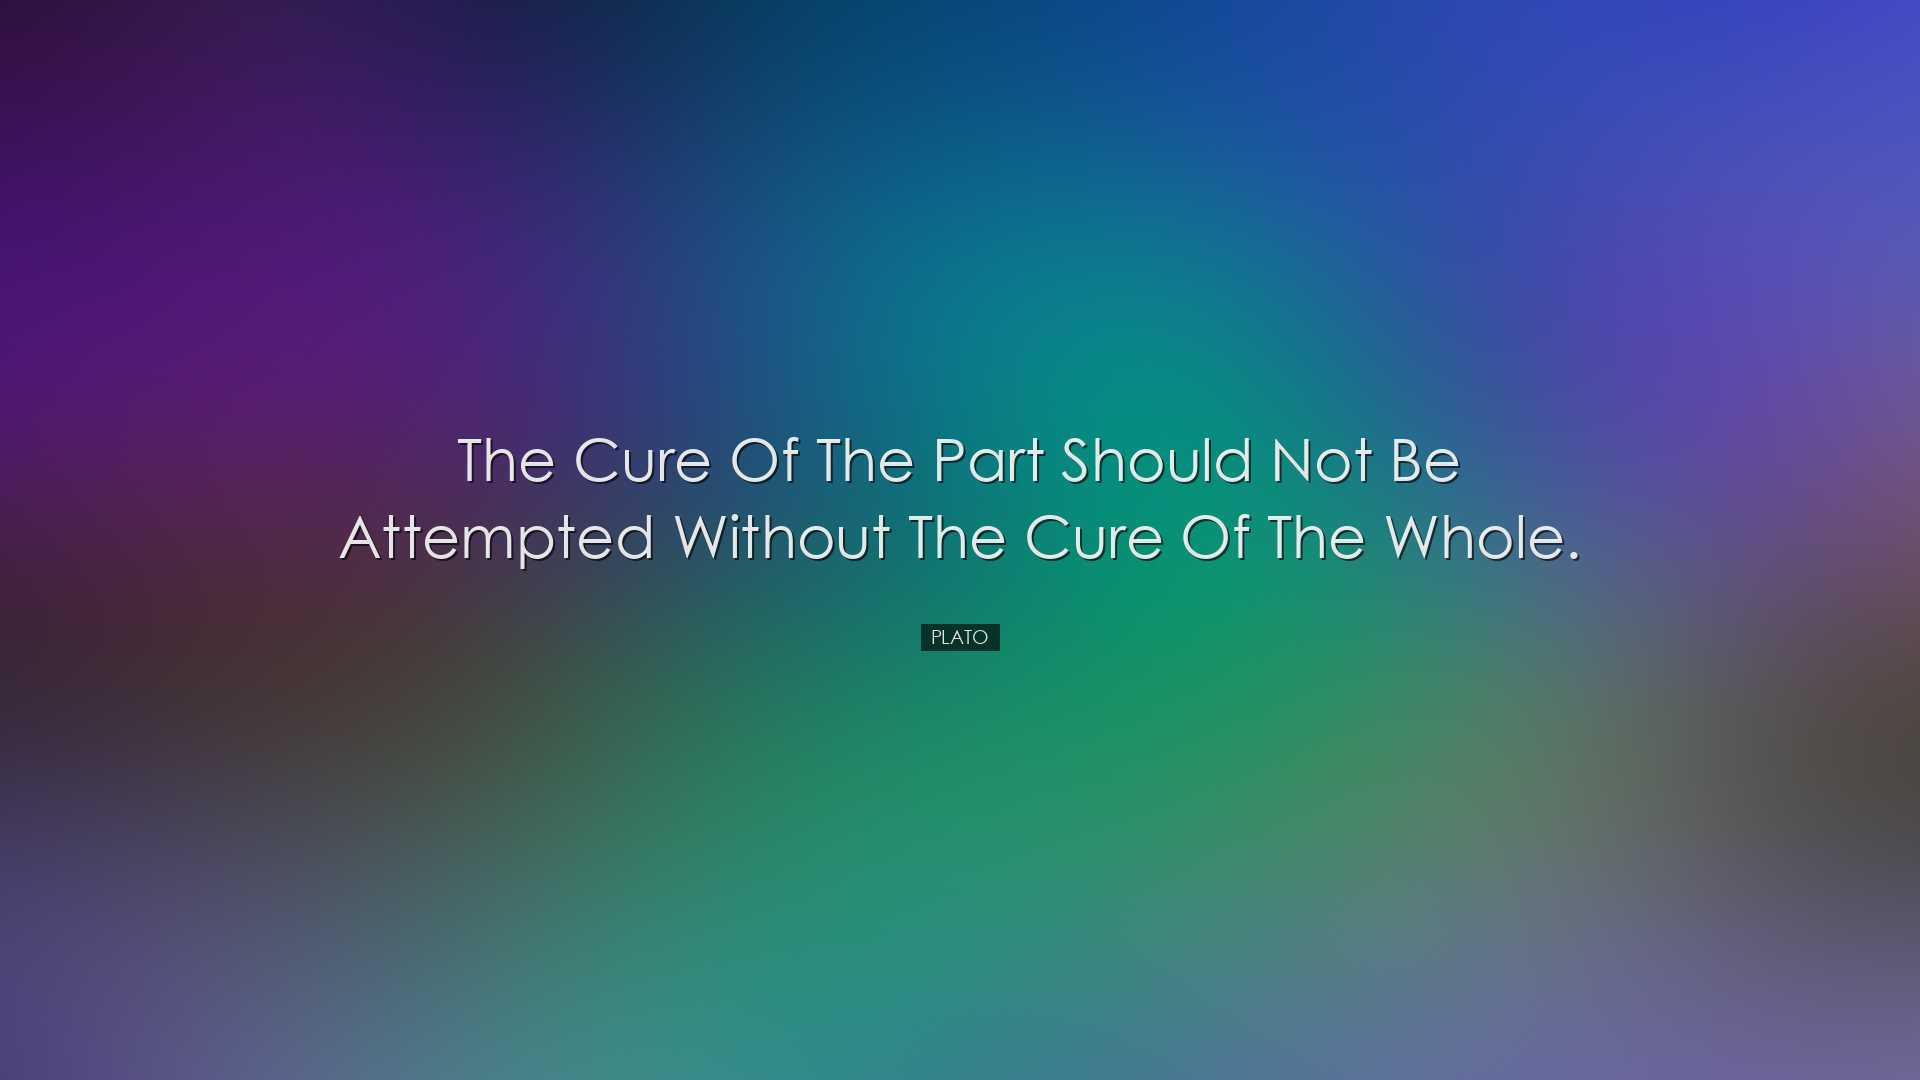 The cure of the part should not be attempted without the cure of t